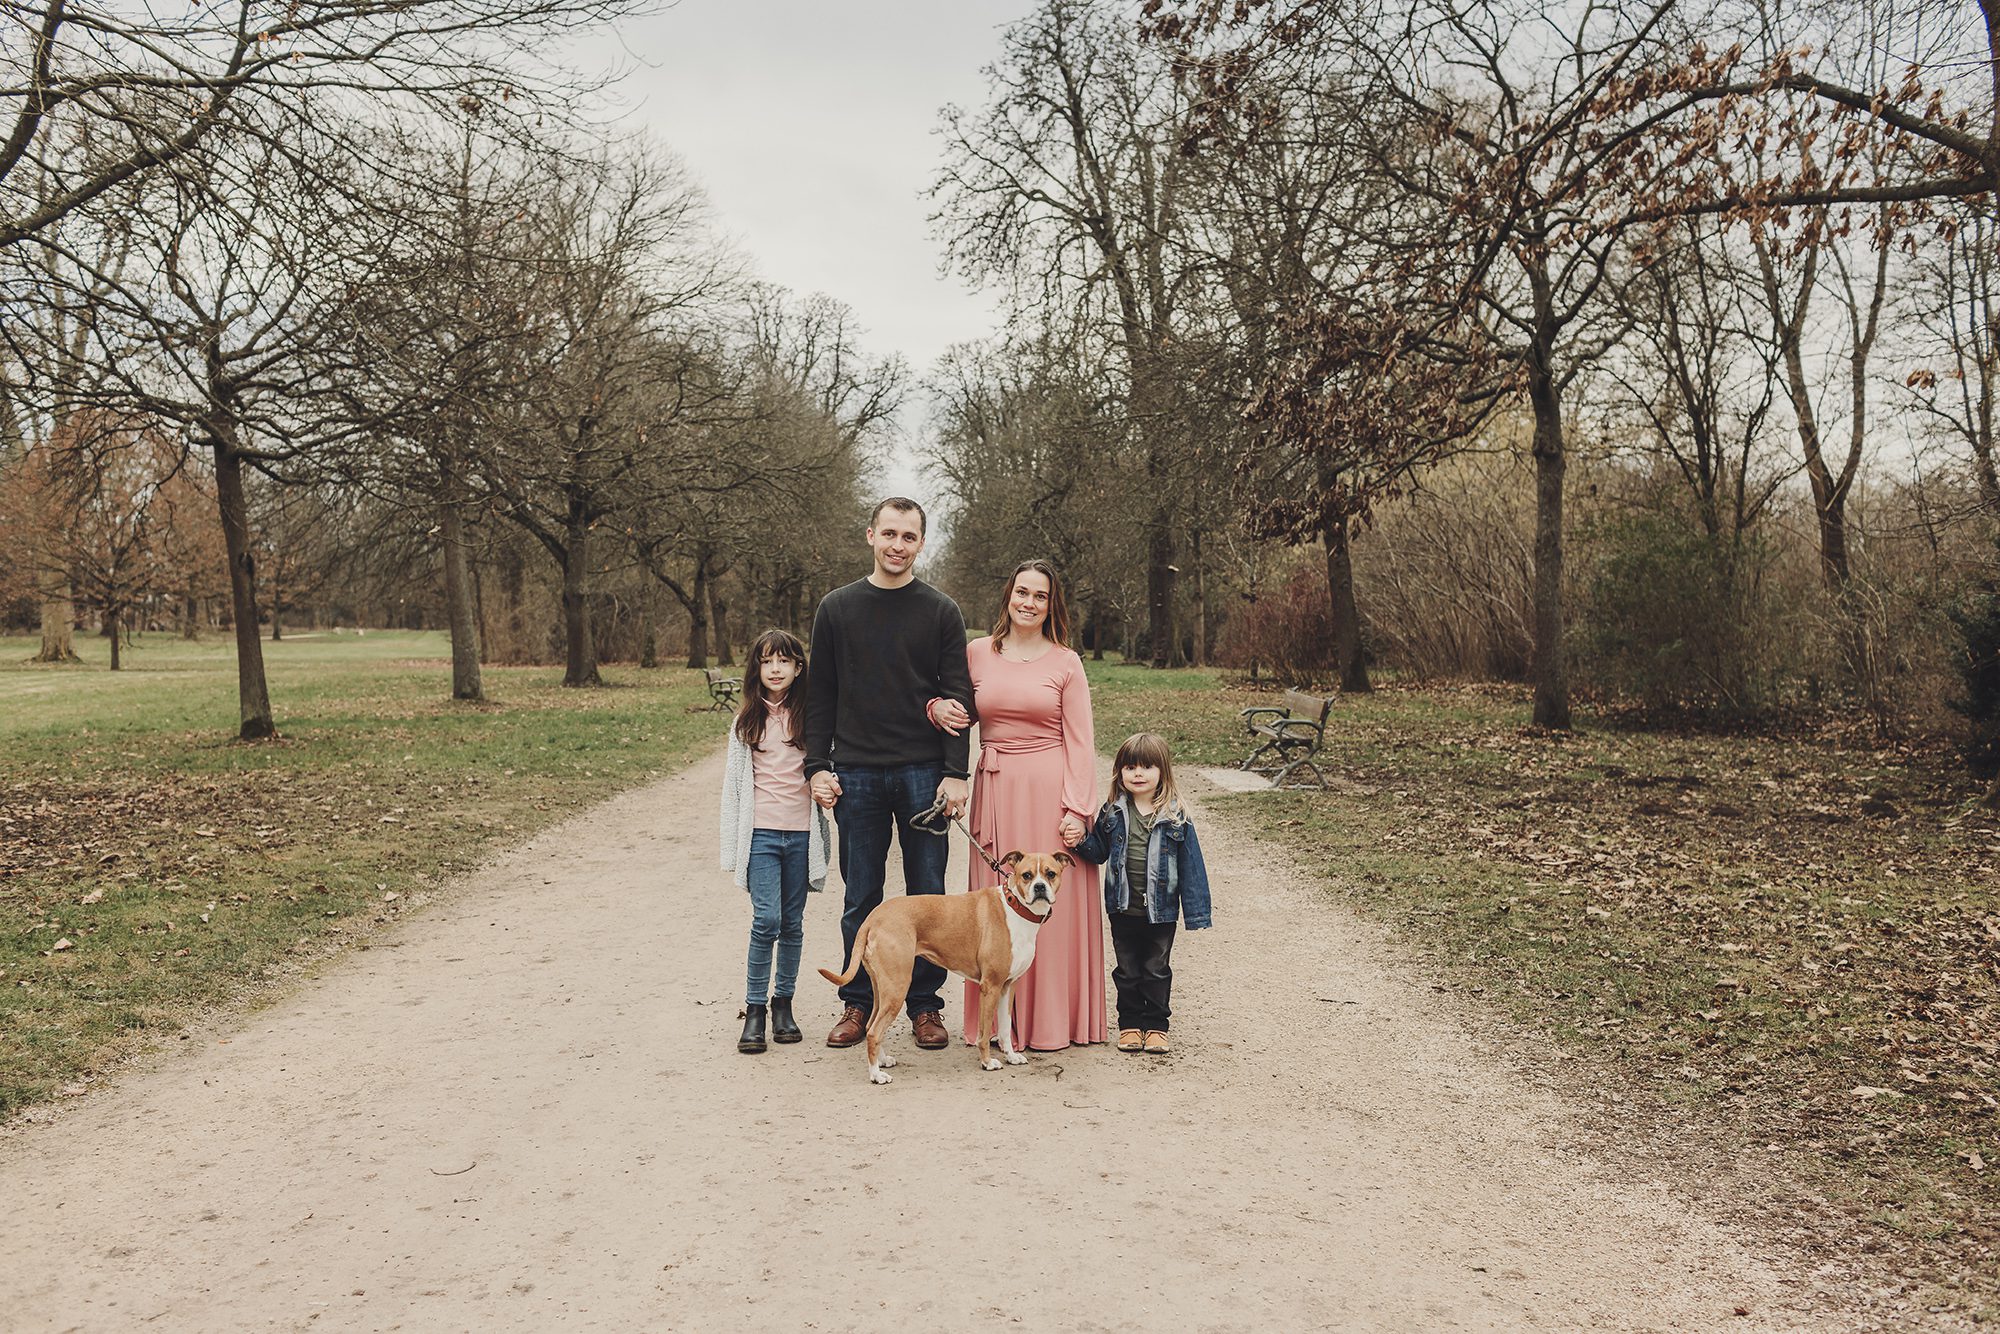 The Castelli family during a family photoshoot at Biebrich park in Wiesbaden